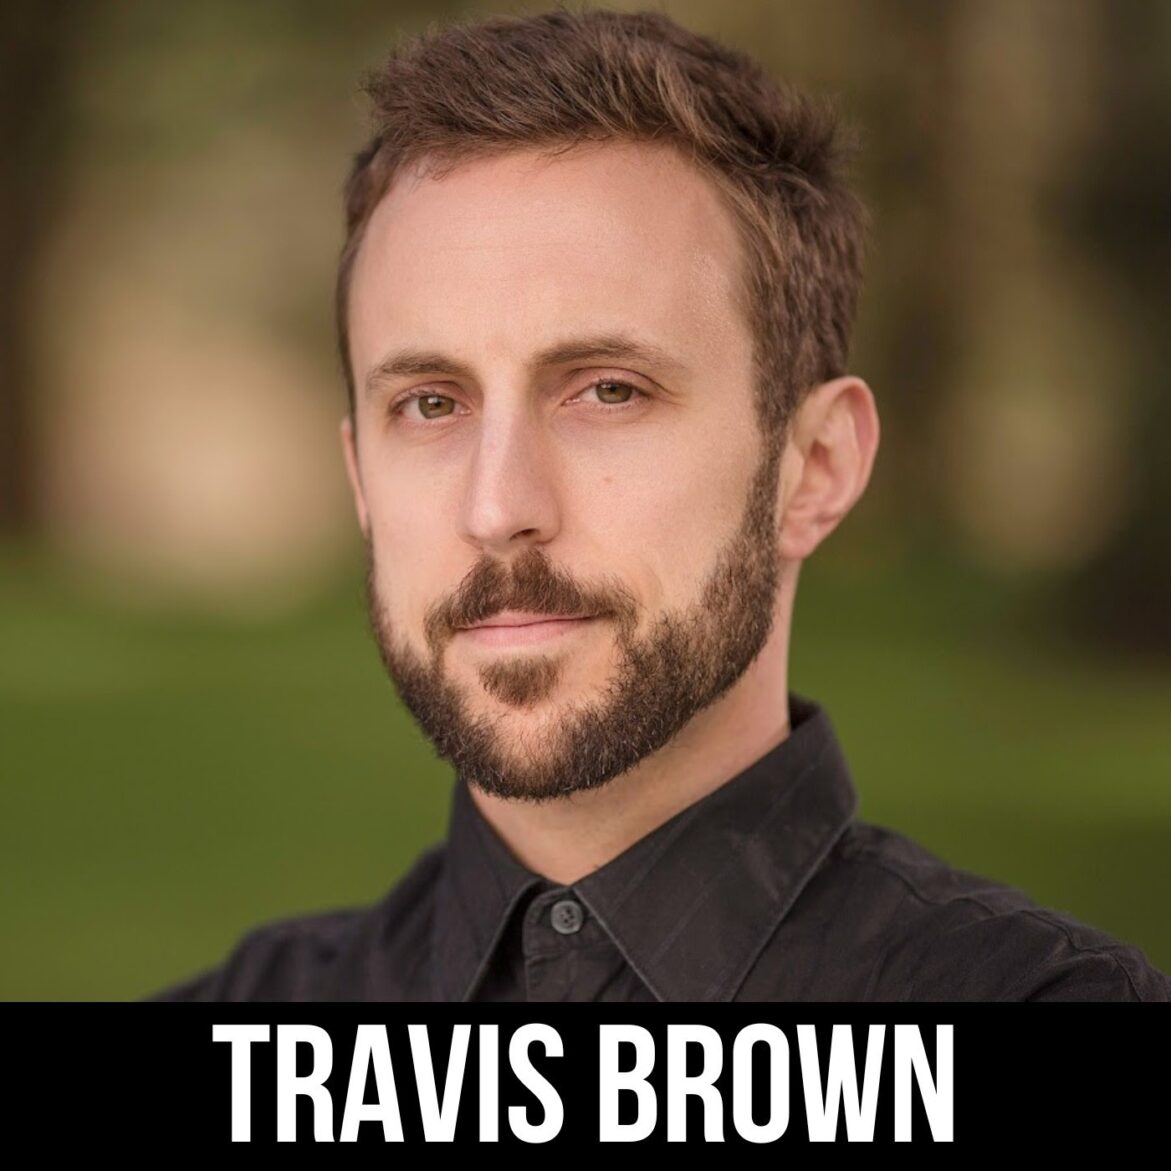 Black Podcasting - #248 Travis Brown - The Rise of Woke Ideology